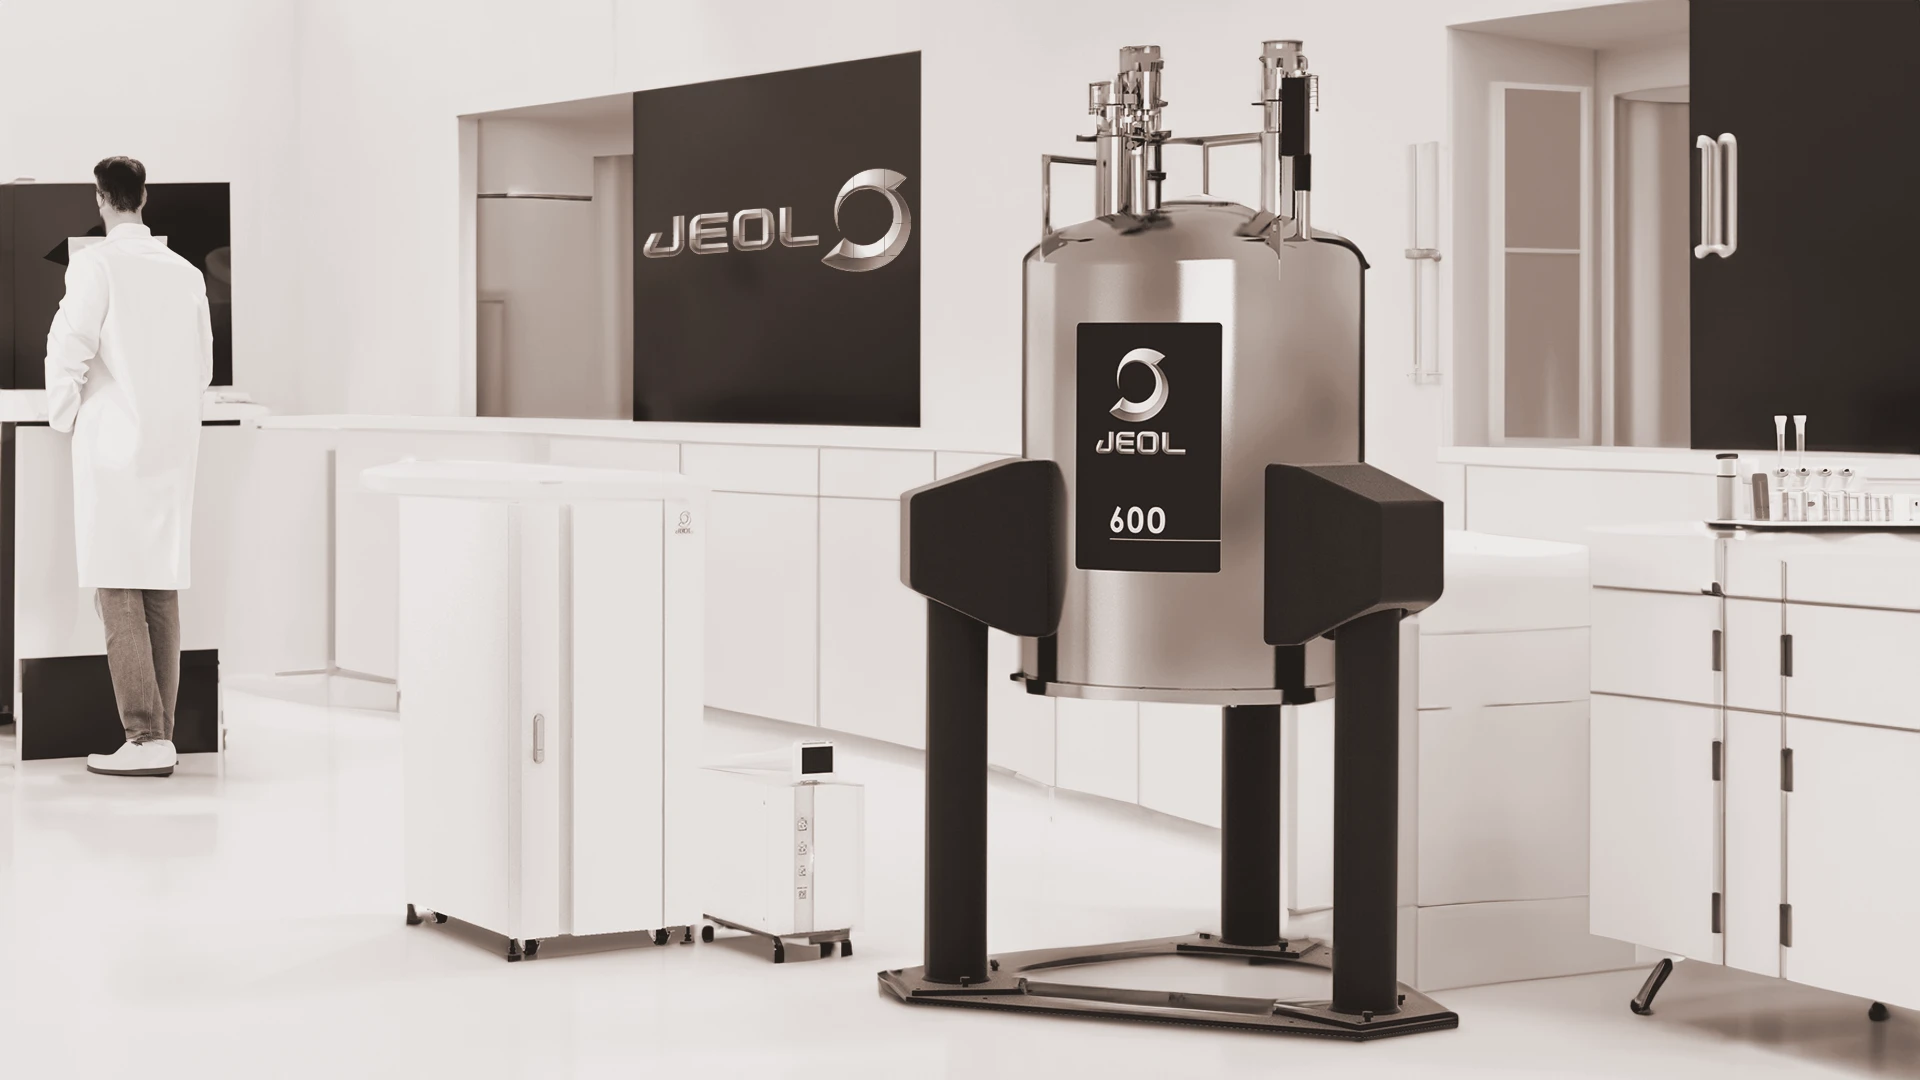 Upgrade or Replace? Making the Right Choice for your aging NMR Instrument